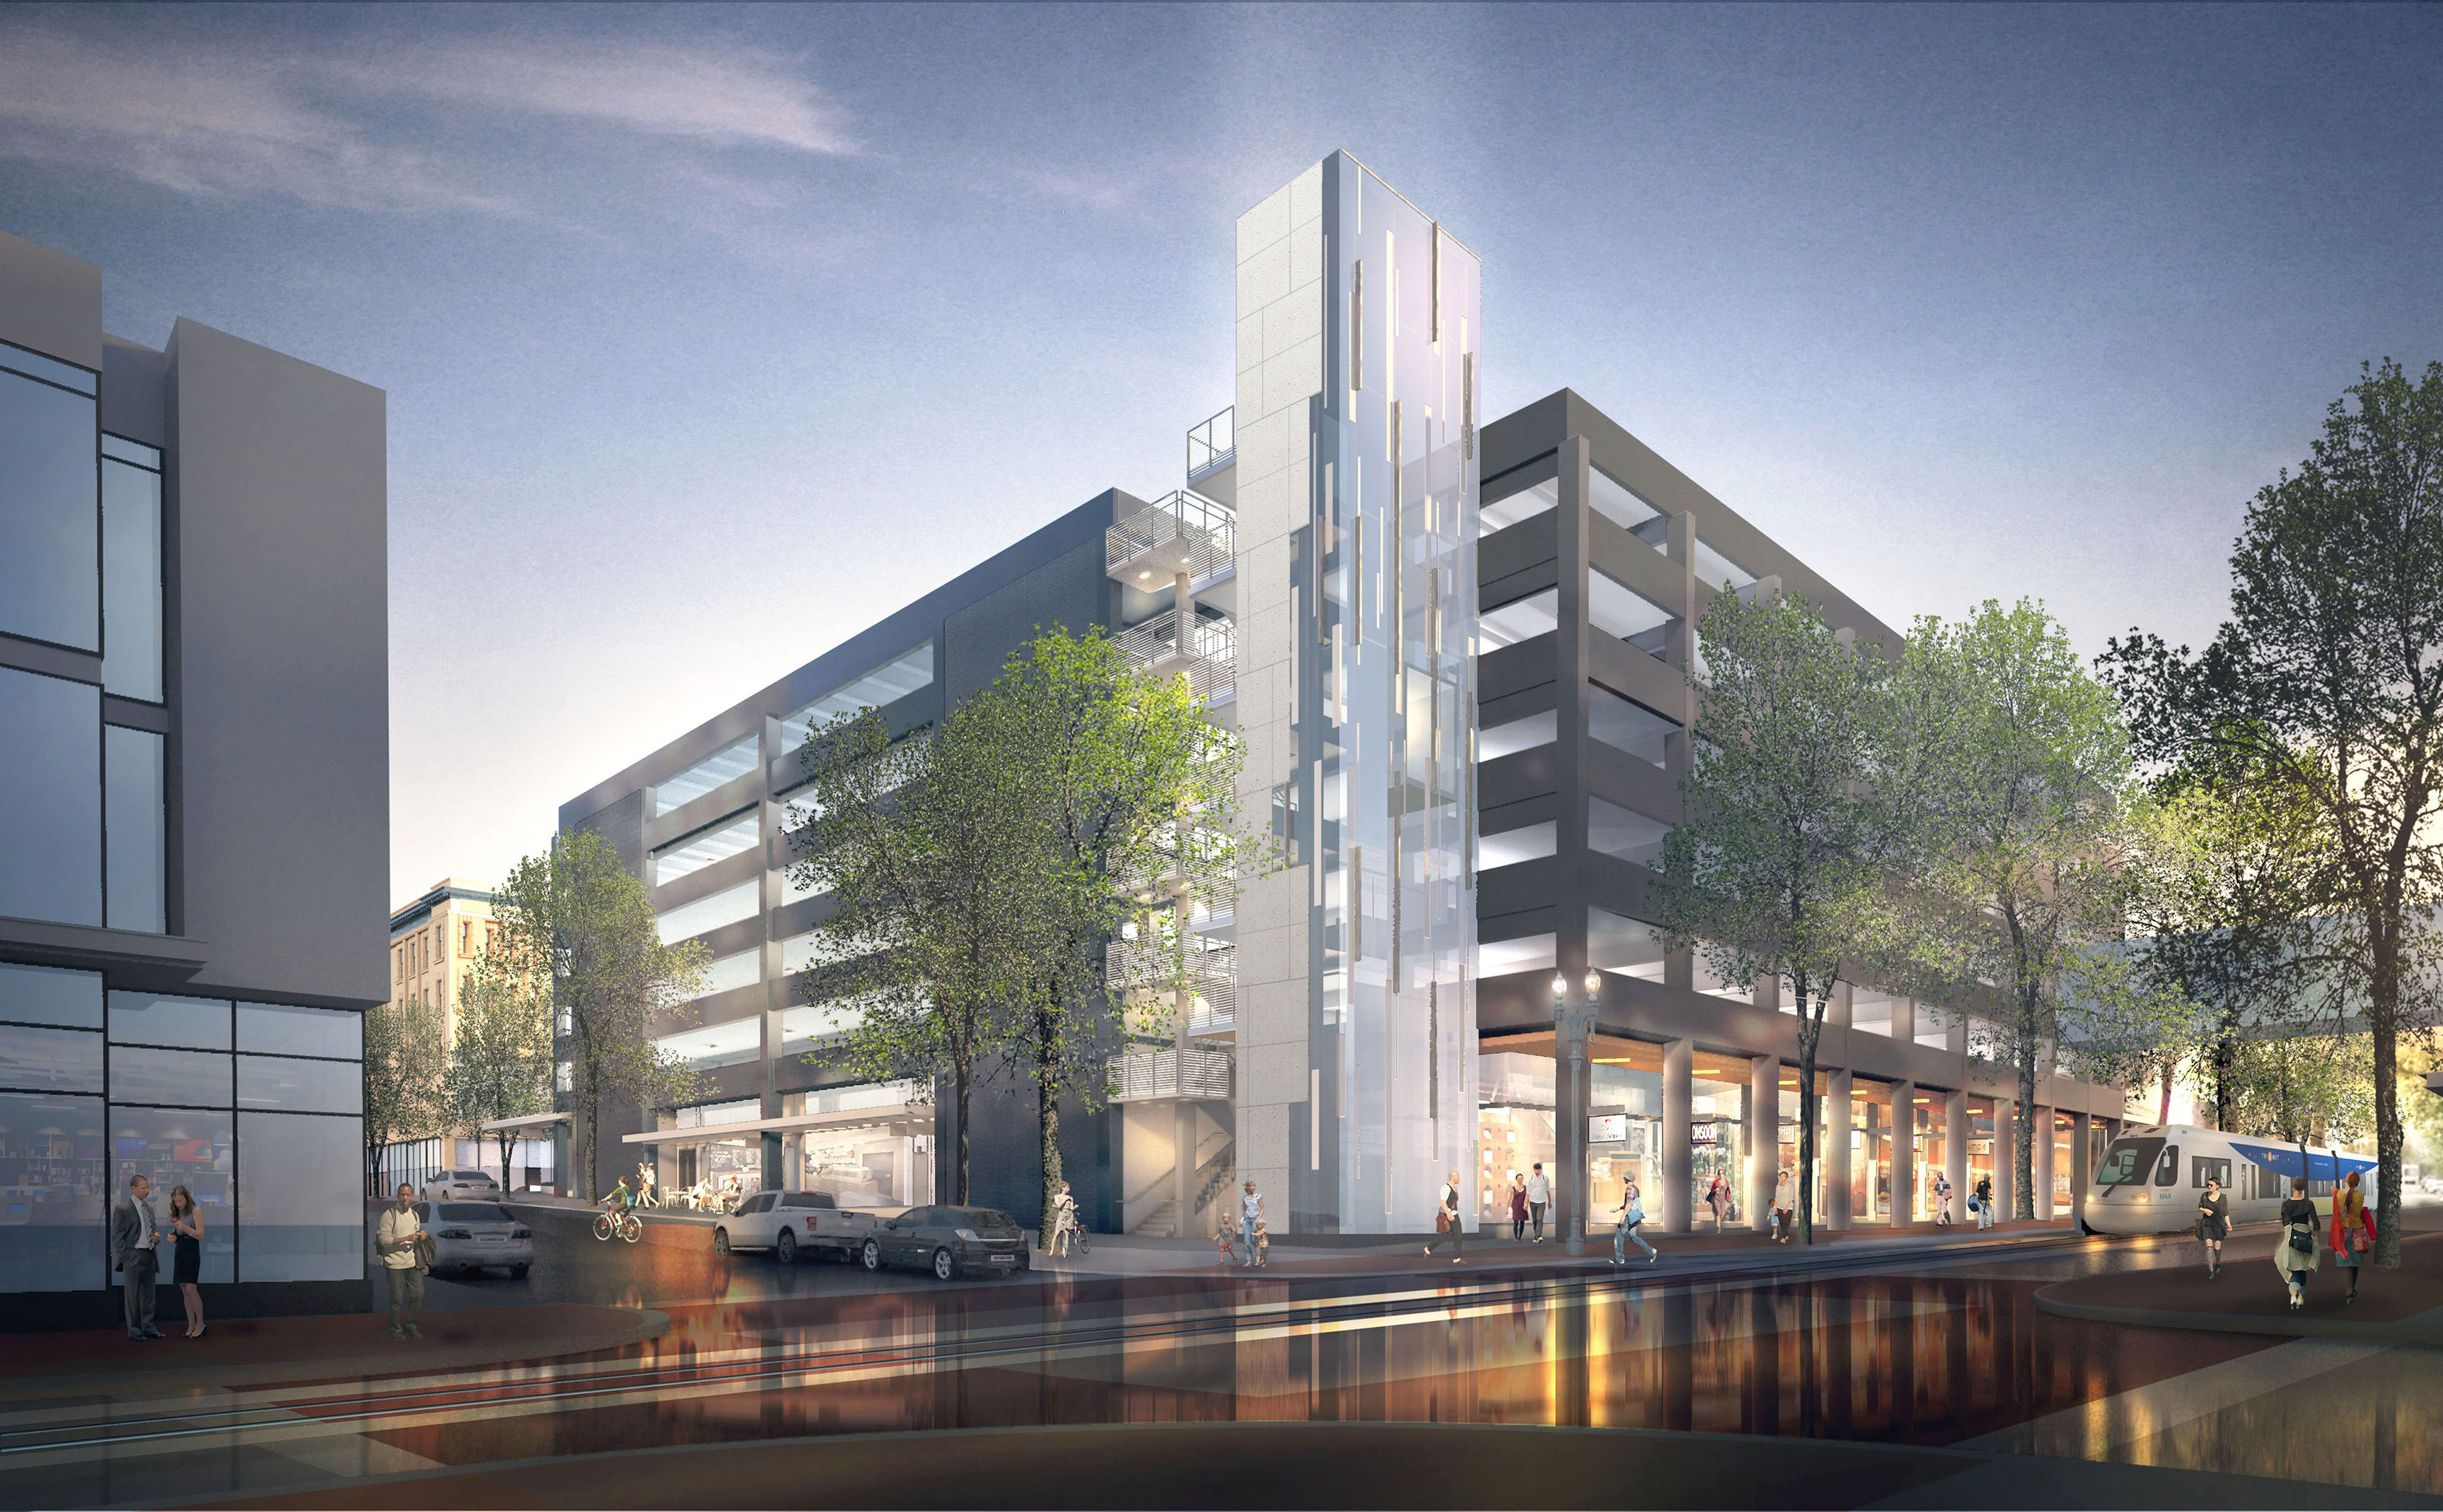 10th & Yamhill Parking Garage Rehabilitation. Rendering showing the Northeast corner of a six-story grey masonry parking garage with retail on the main floor. The stairway on the corner of the building is clad in patterned metal with breaks at various levels which creates transparency.